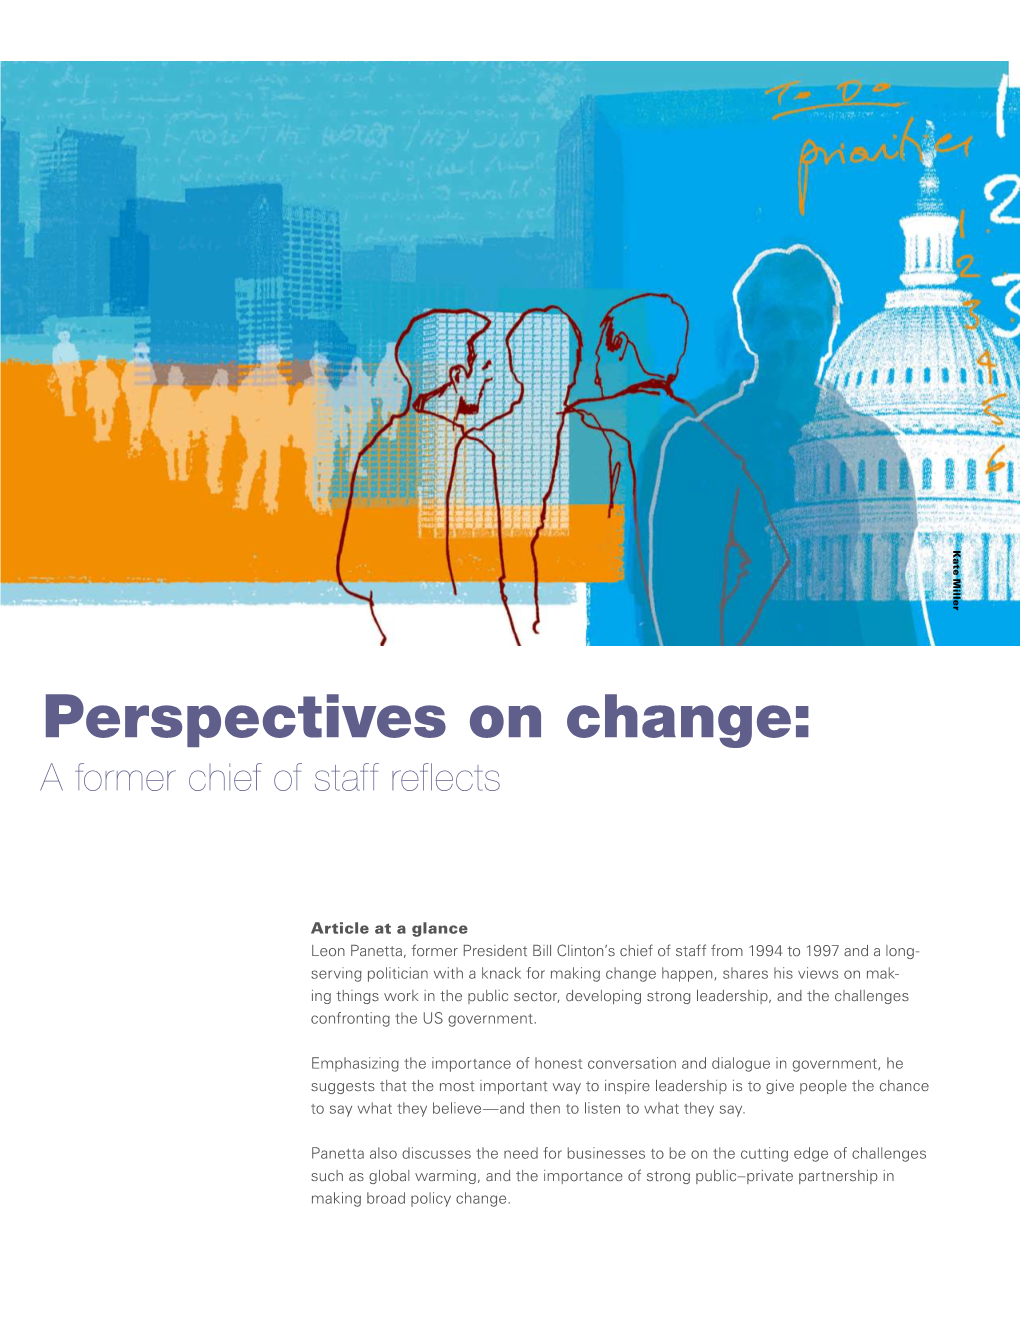 Perspectives on Change: a Former Chief of Staff Reflects